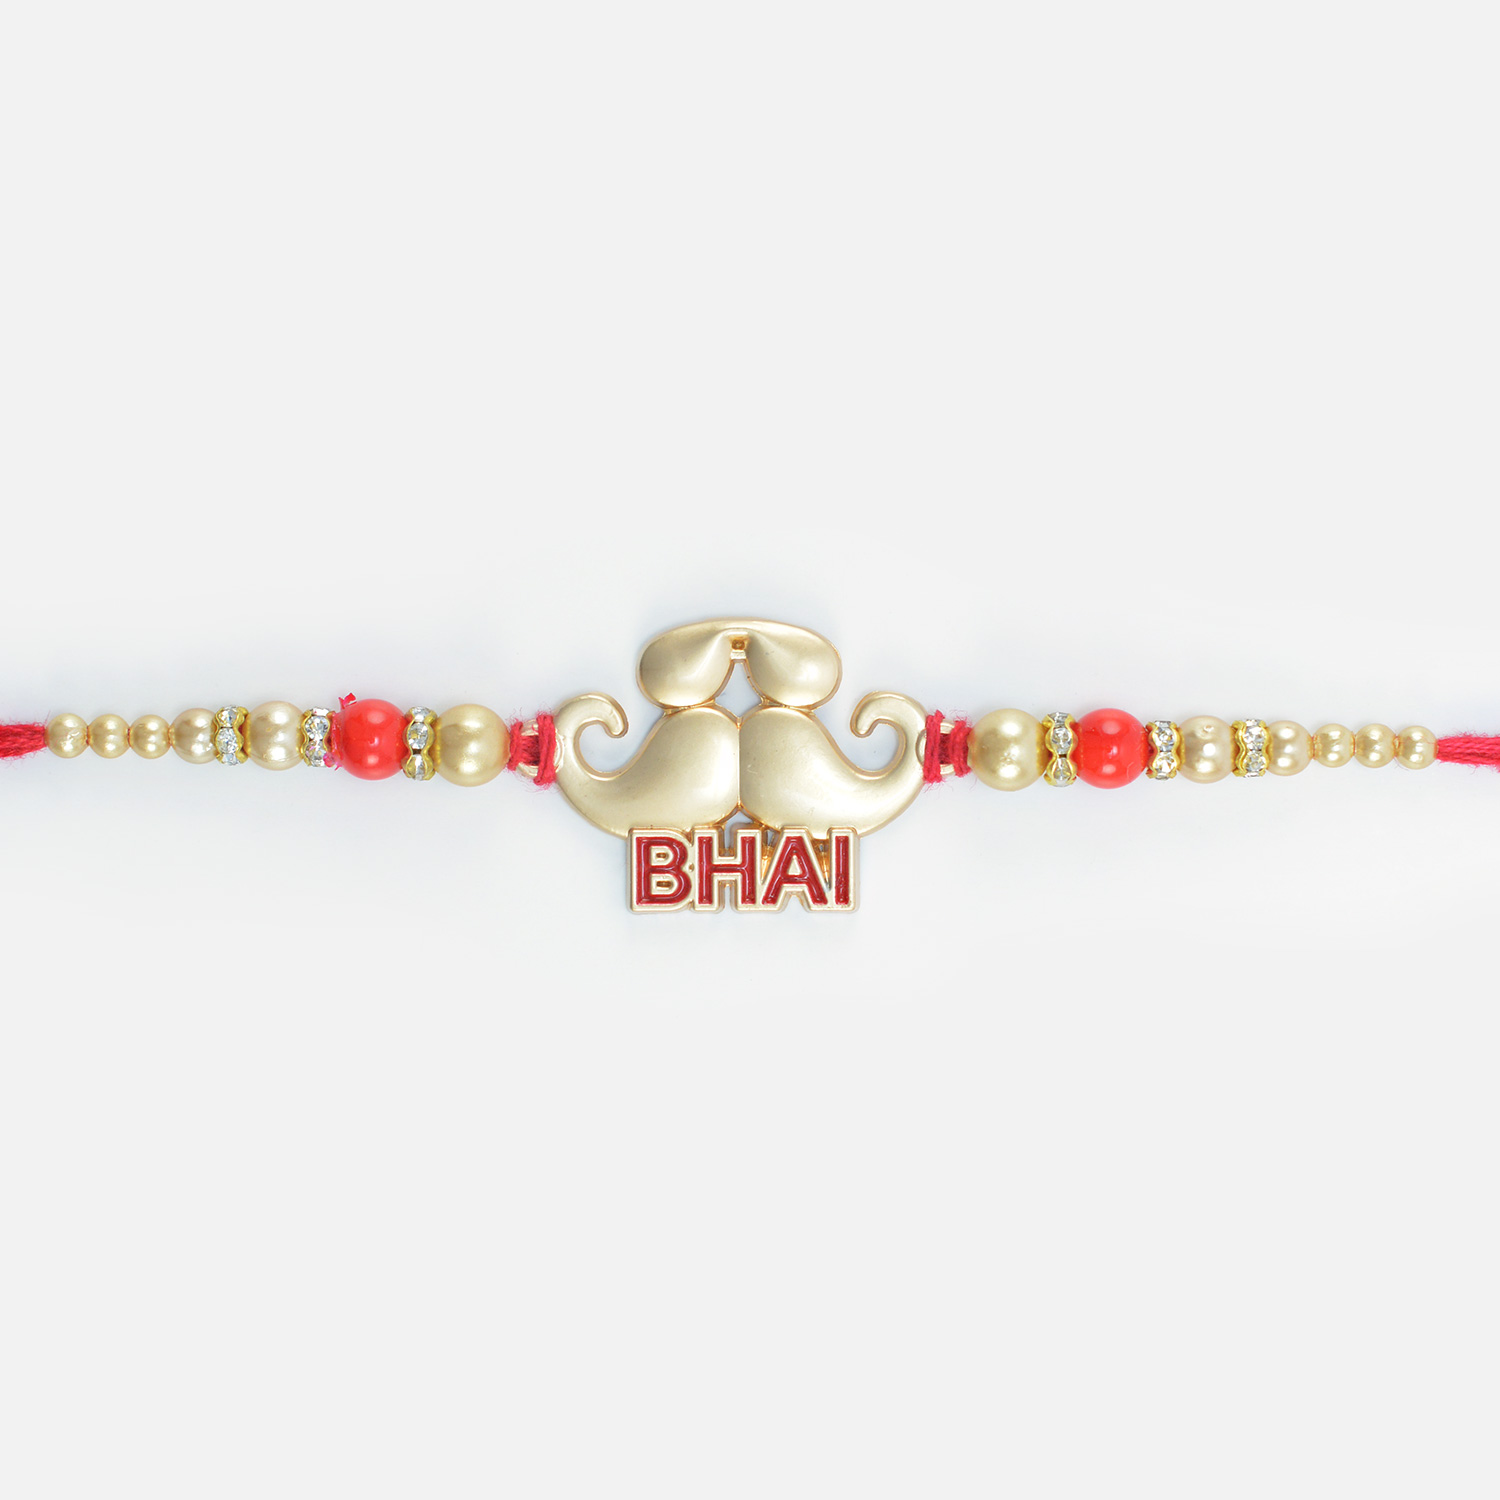 New Modern Style Looking Mustache Design er Pearl and Beads Rakhi for Brother